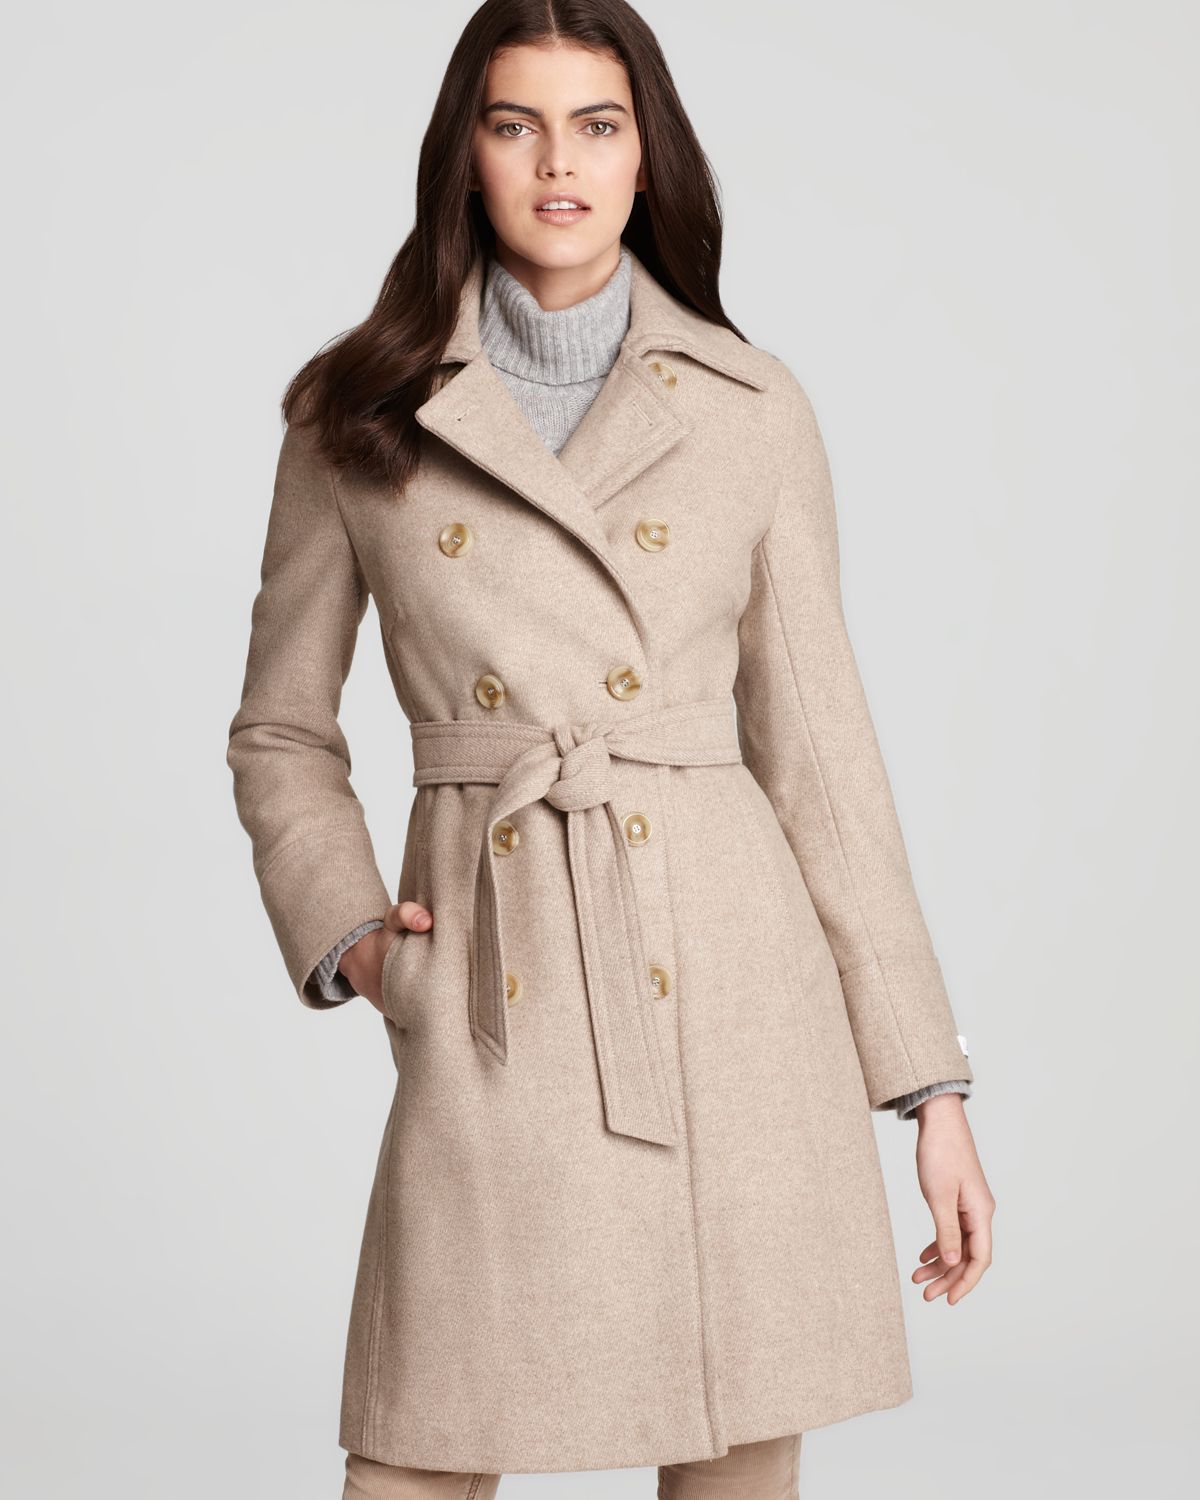 Lyst - Calvin Klein Double Breasted Belted Trench Coat in Natural